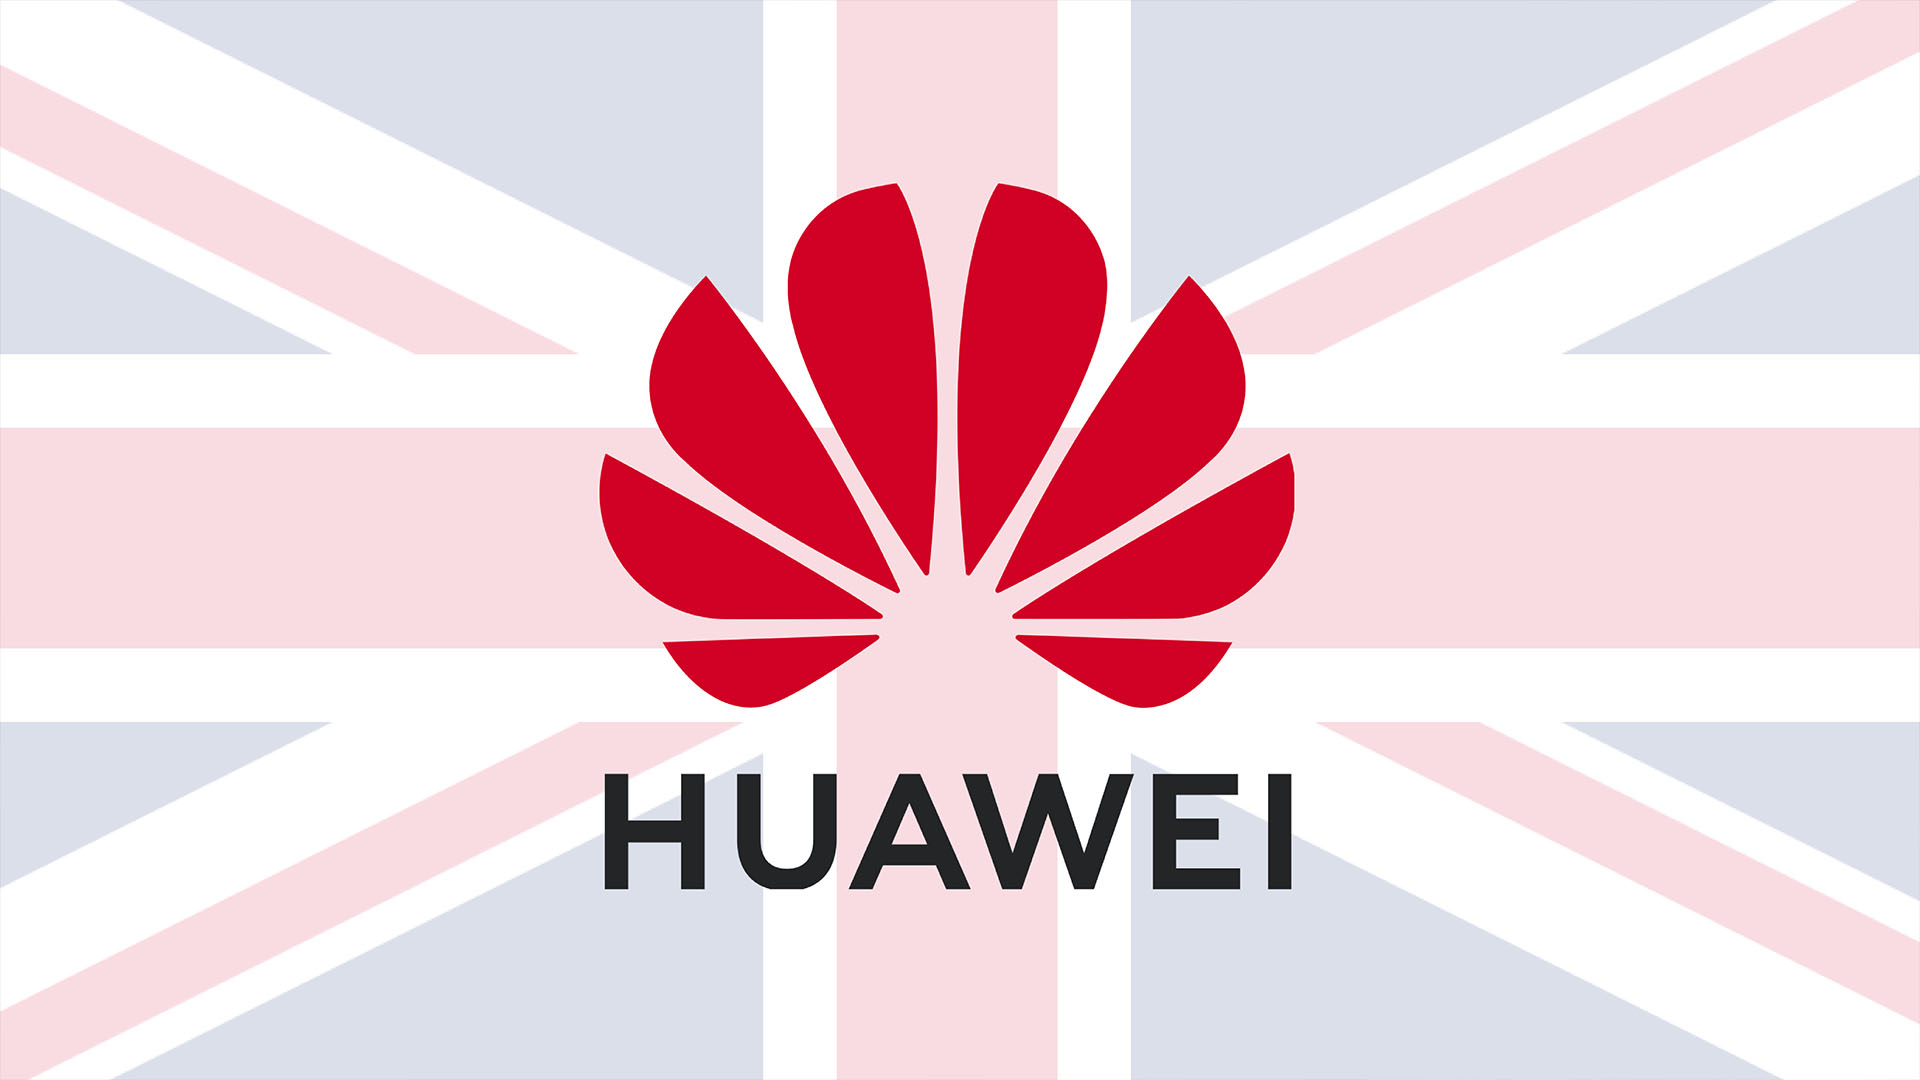 Huawei not to be a part of UK's 5G network after 2027